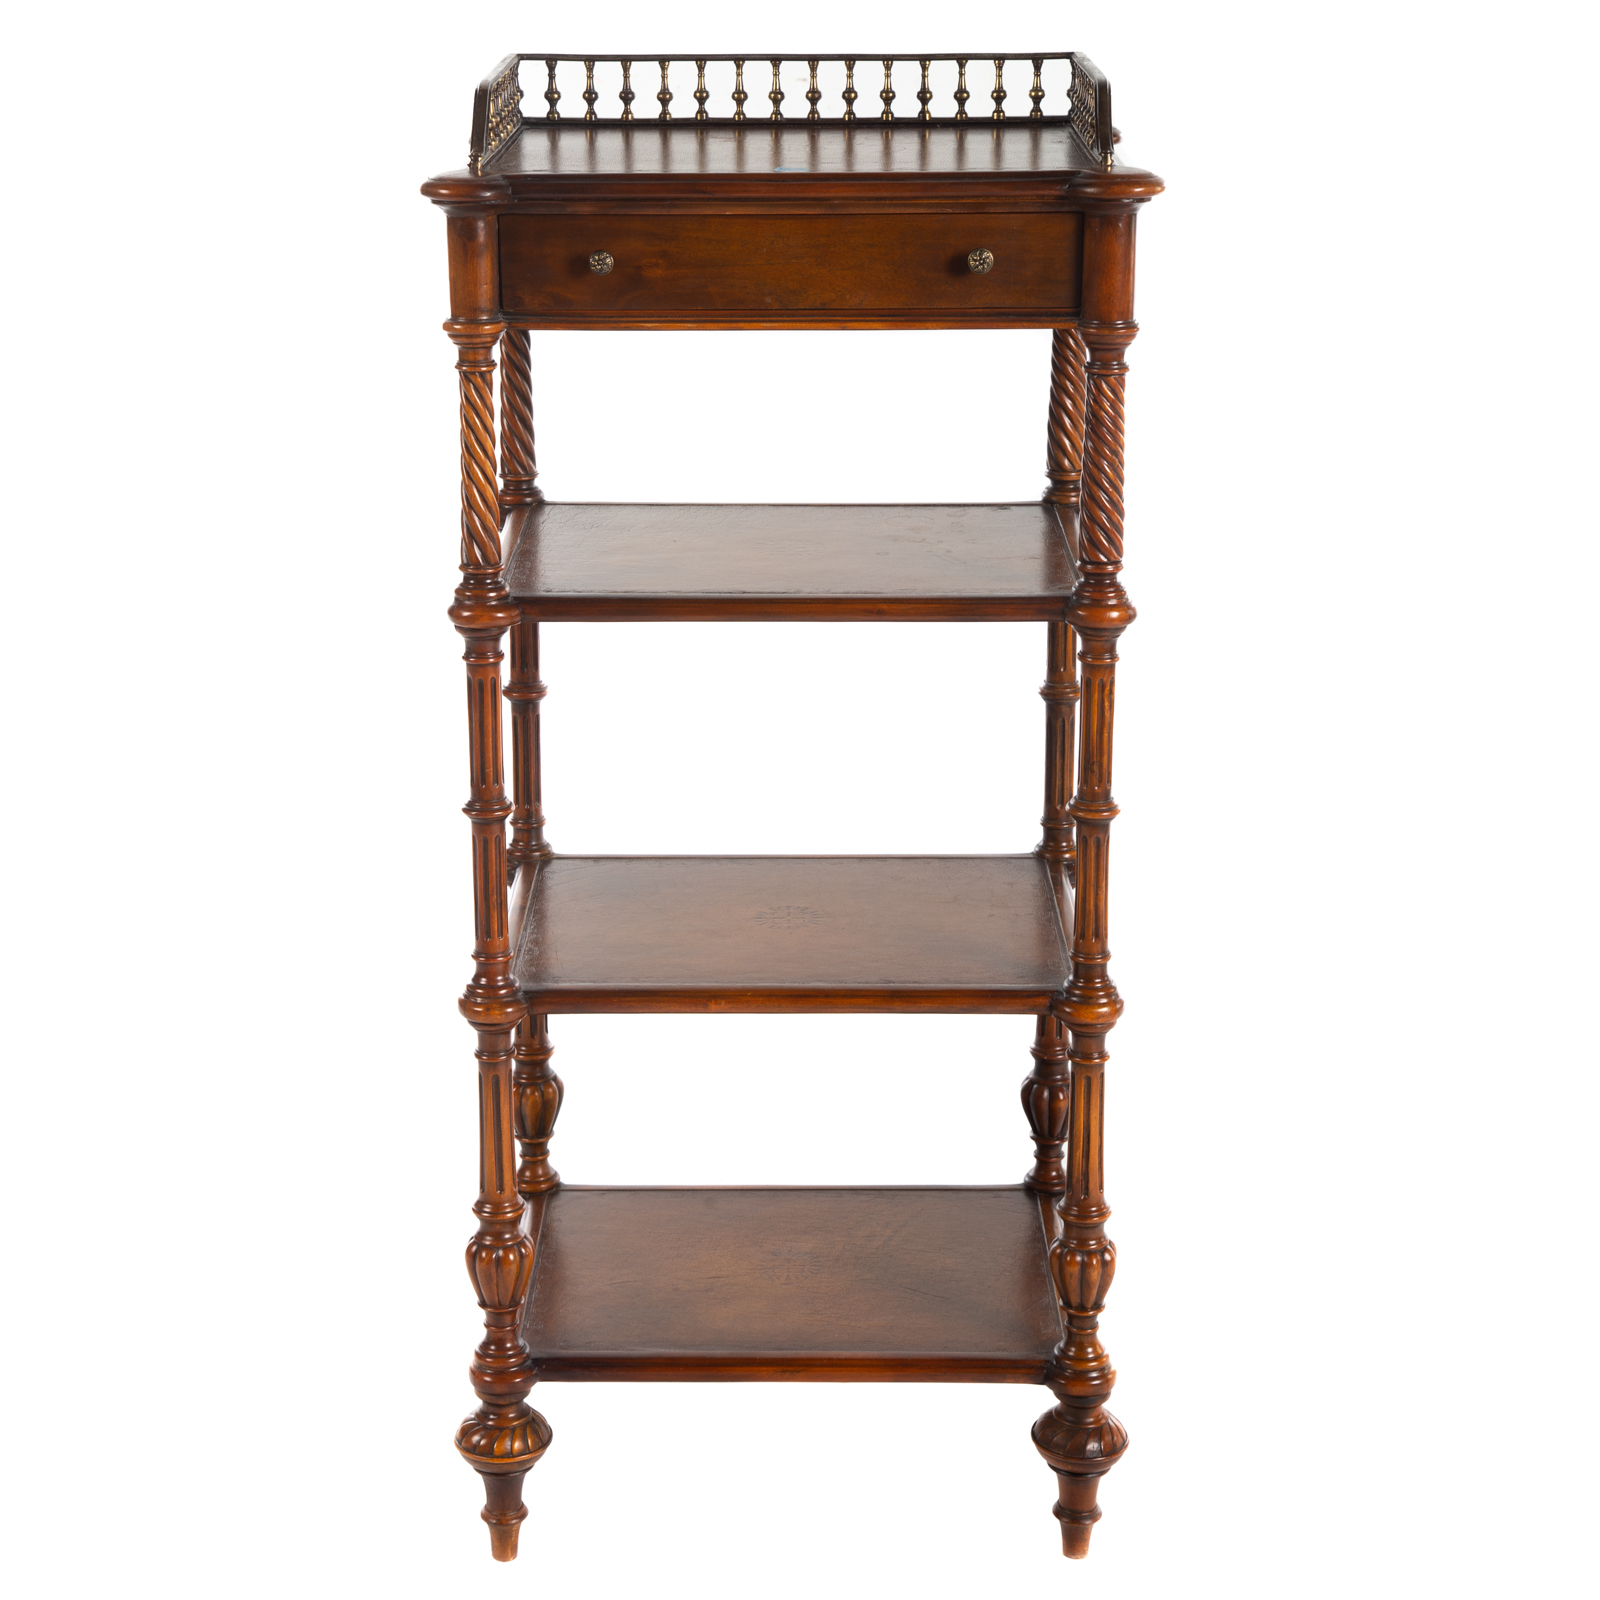 REGENCY STYLE LEATHER TOP ETAGERE 369a0a